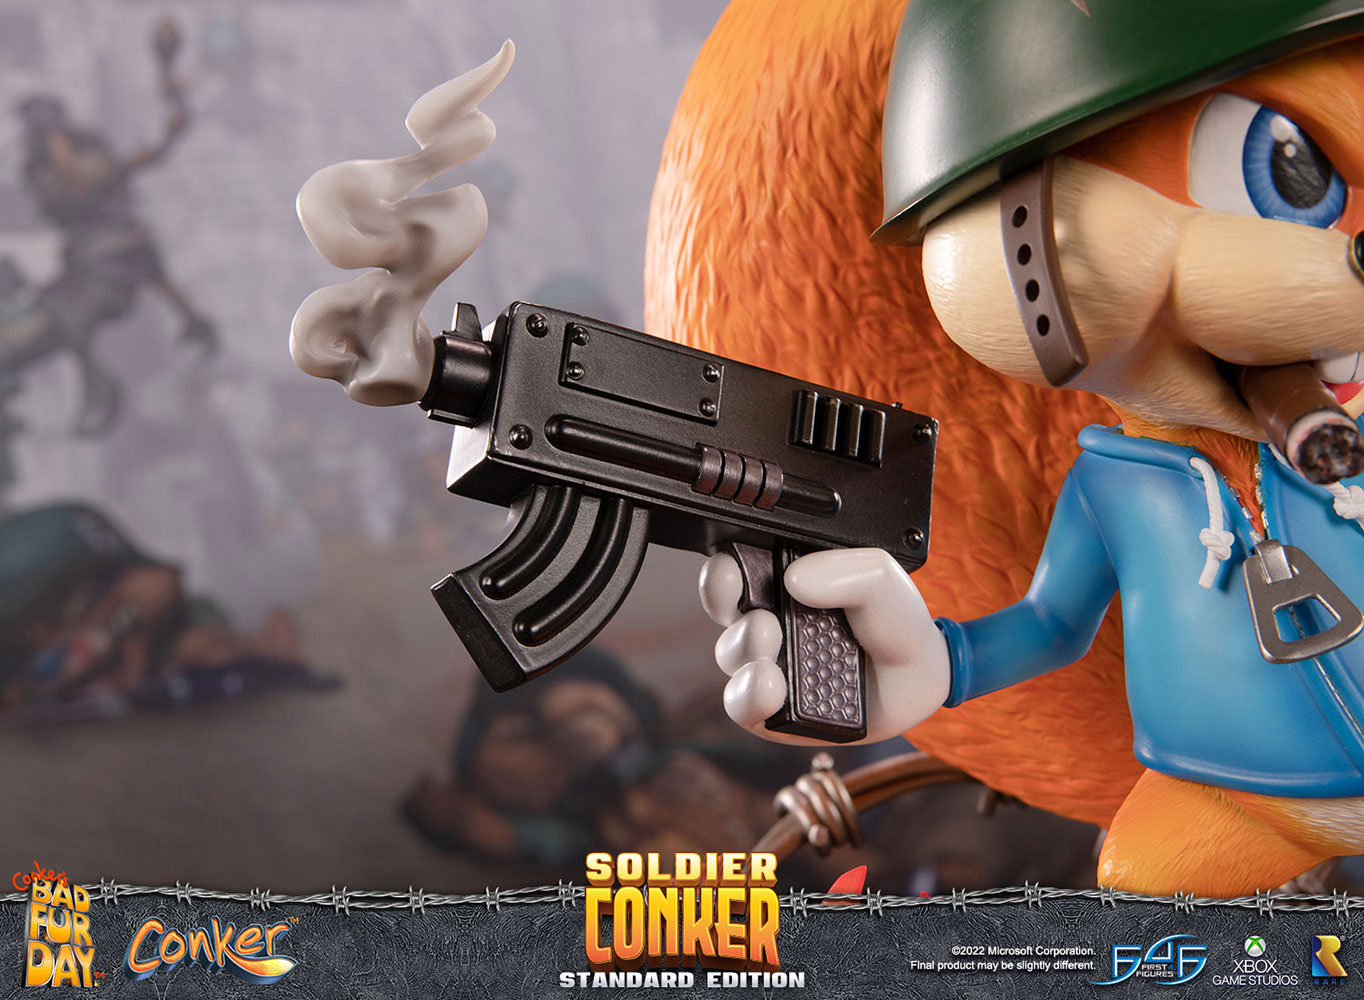 Soldier Conker (Standard Edition)- Prototype Shown